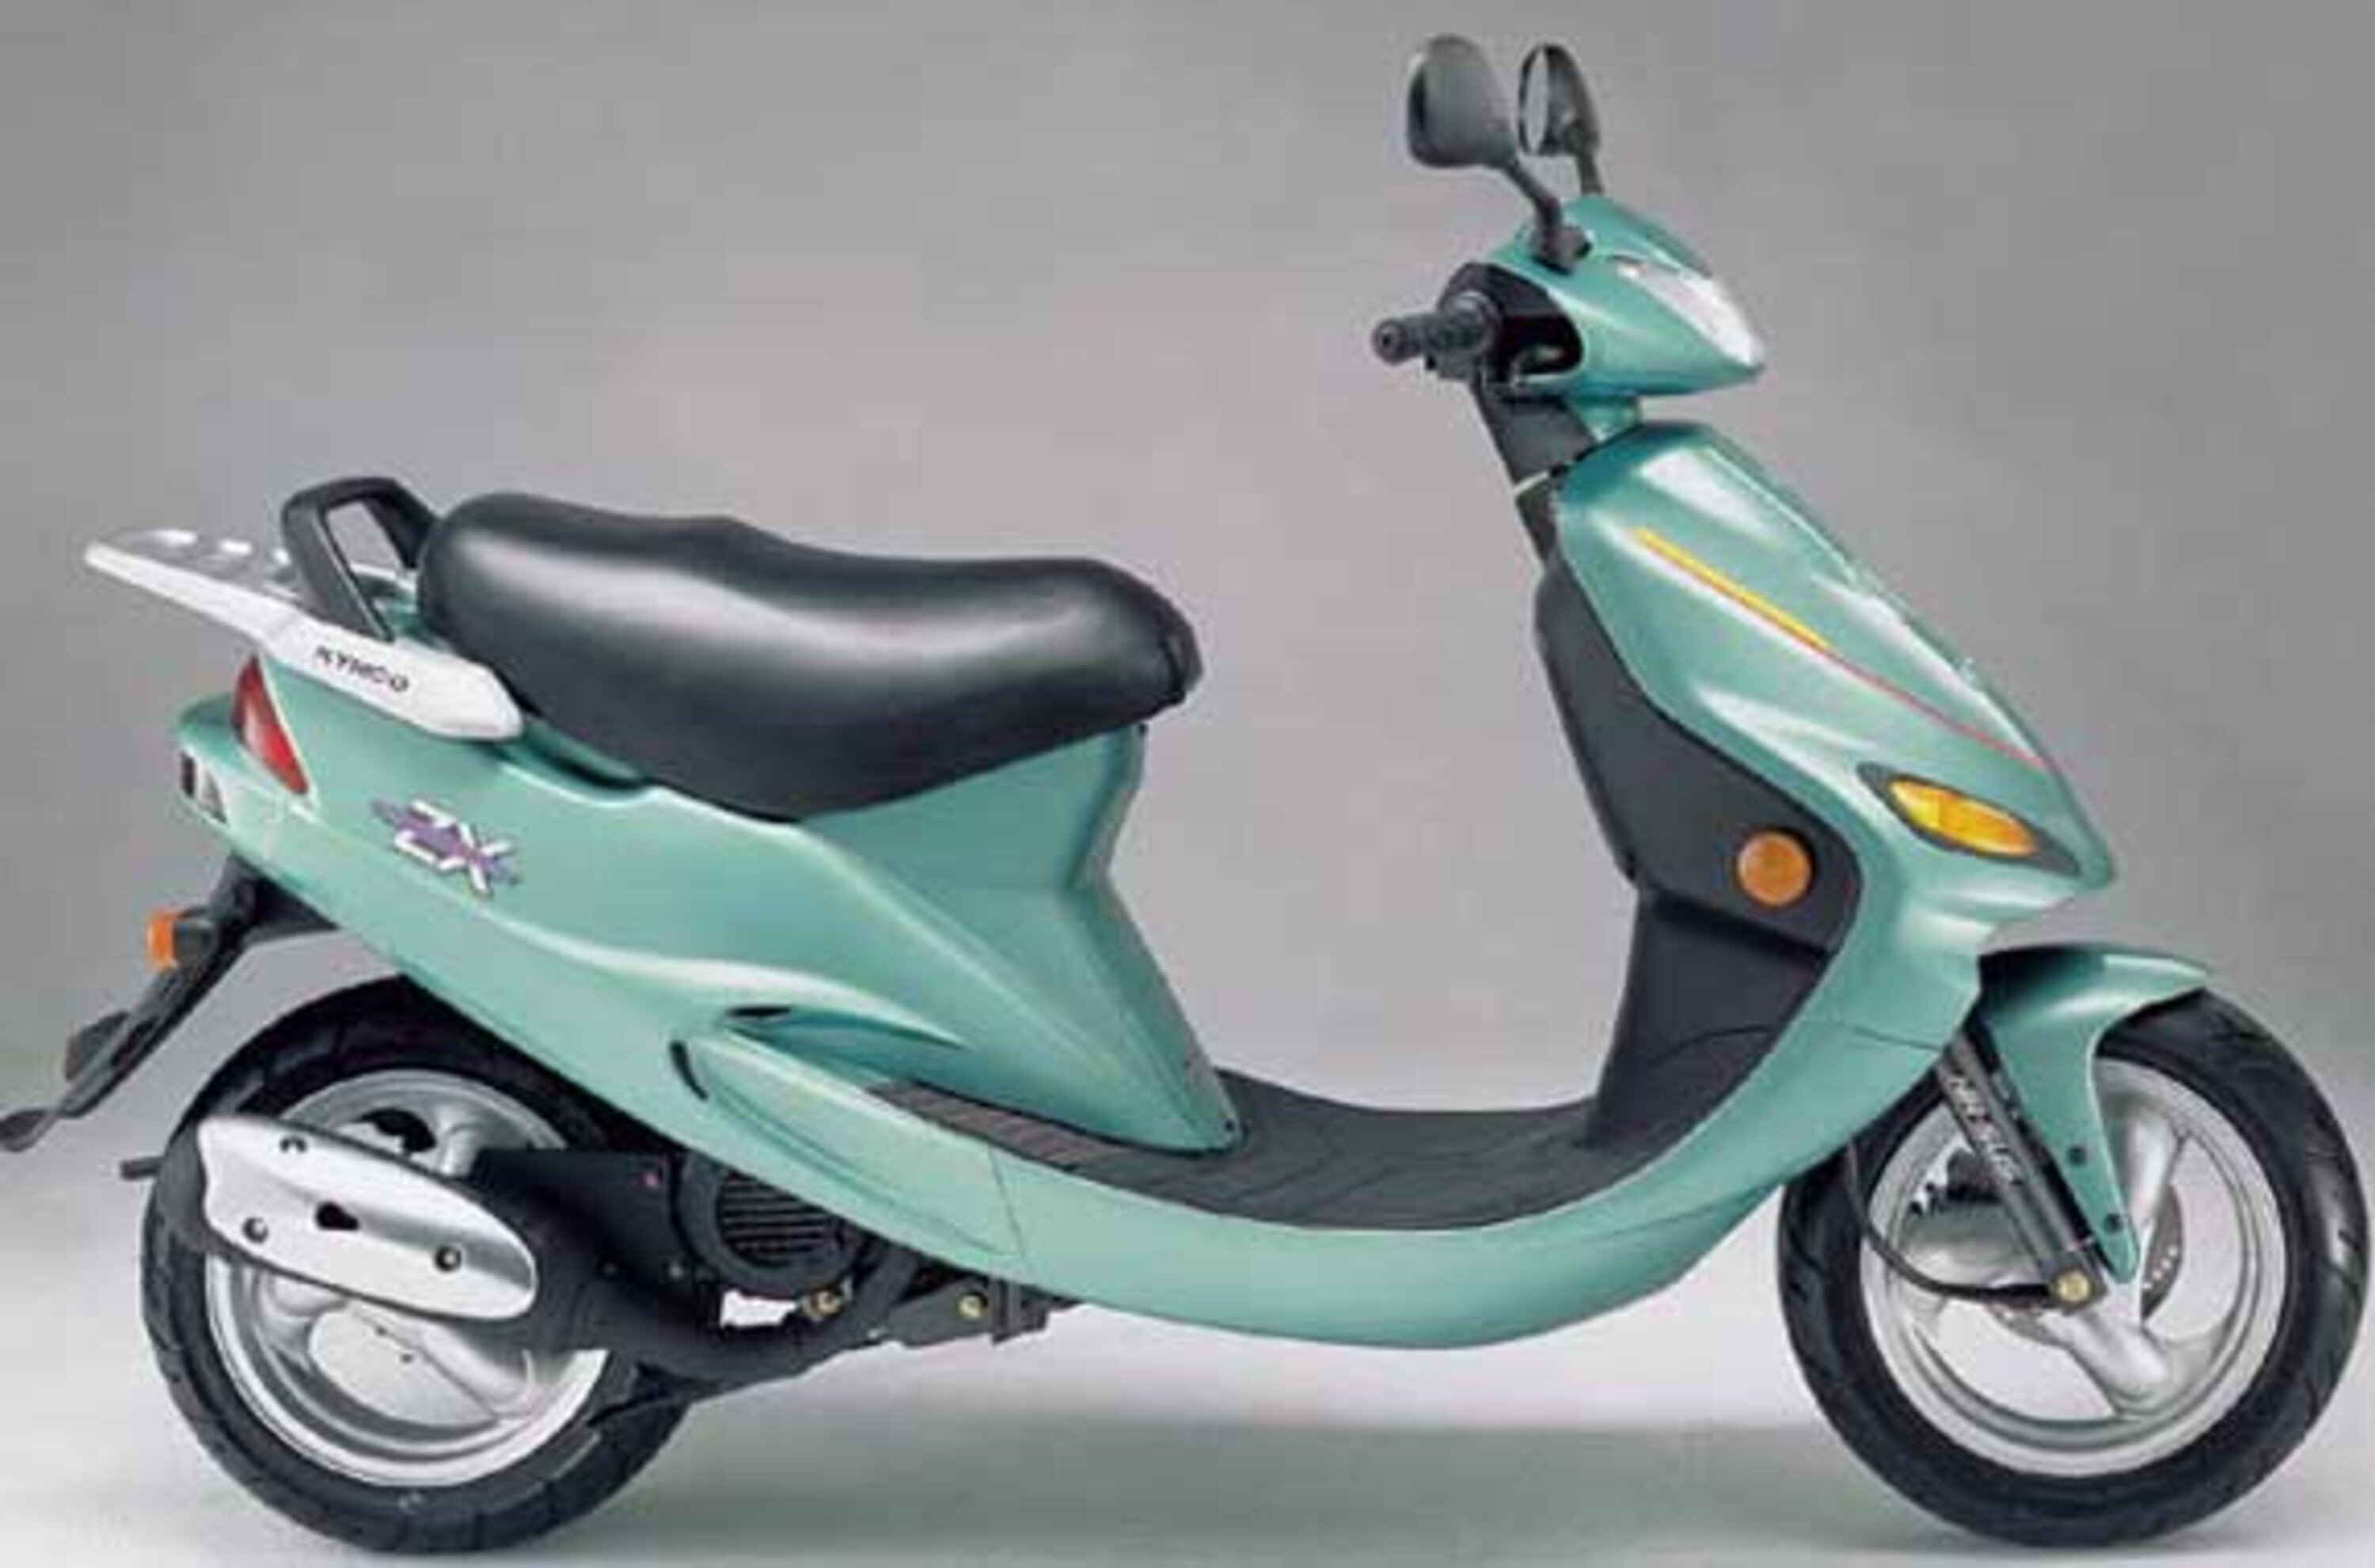 Kymco Fever ZX 50 Fever ZX 50 Eco Cat (1999 - 01)